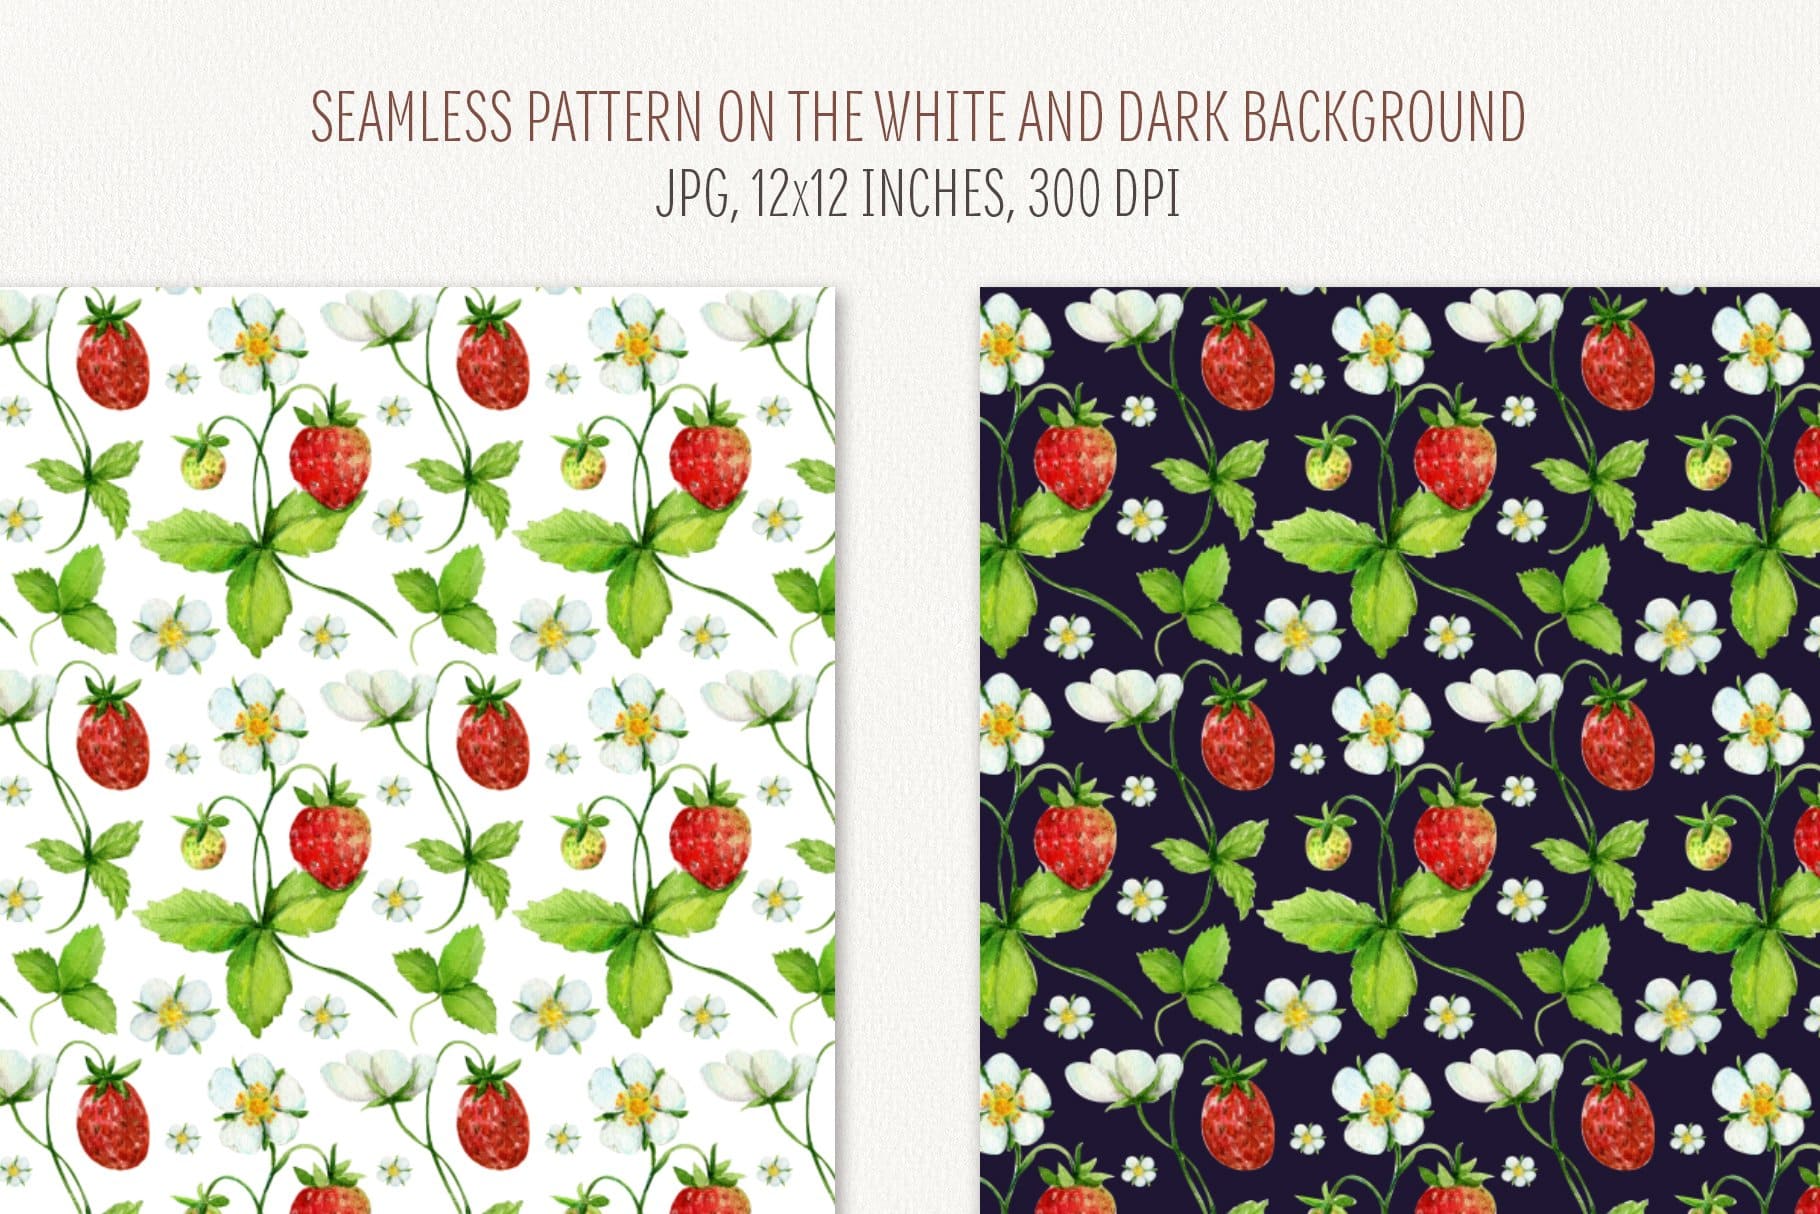 Strawberry bushes are depicted on white and black backgrounds.